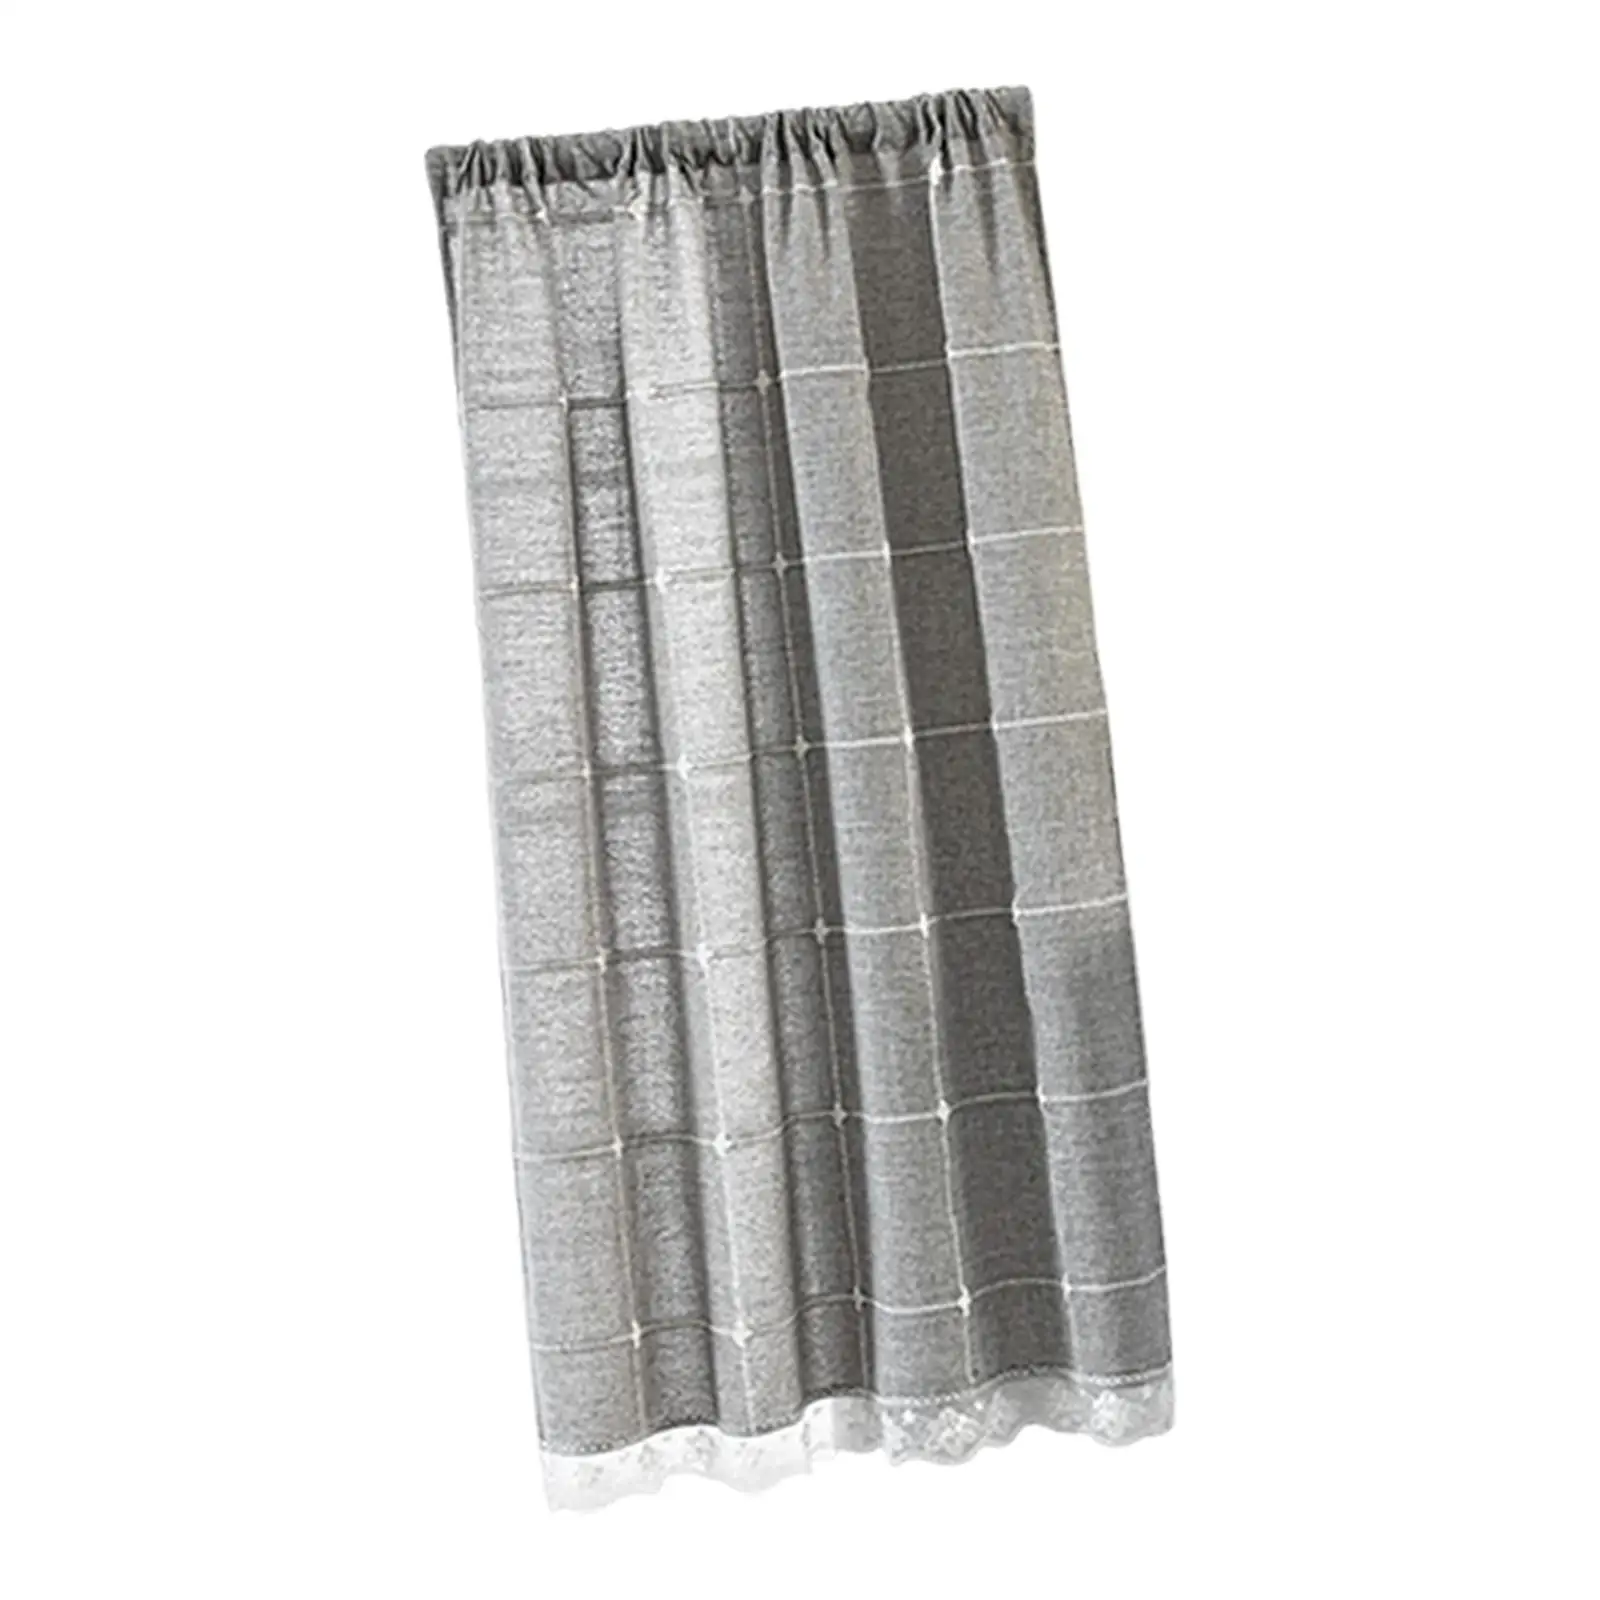 Fashion Rod Pocket Curtain Translucent Privacy Drapes for Patio Door Bedroom